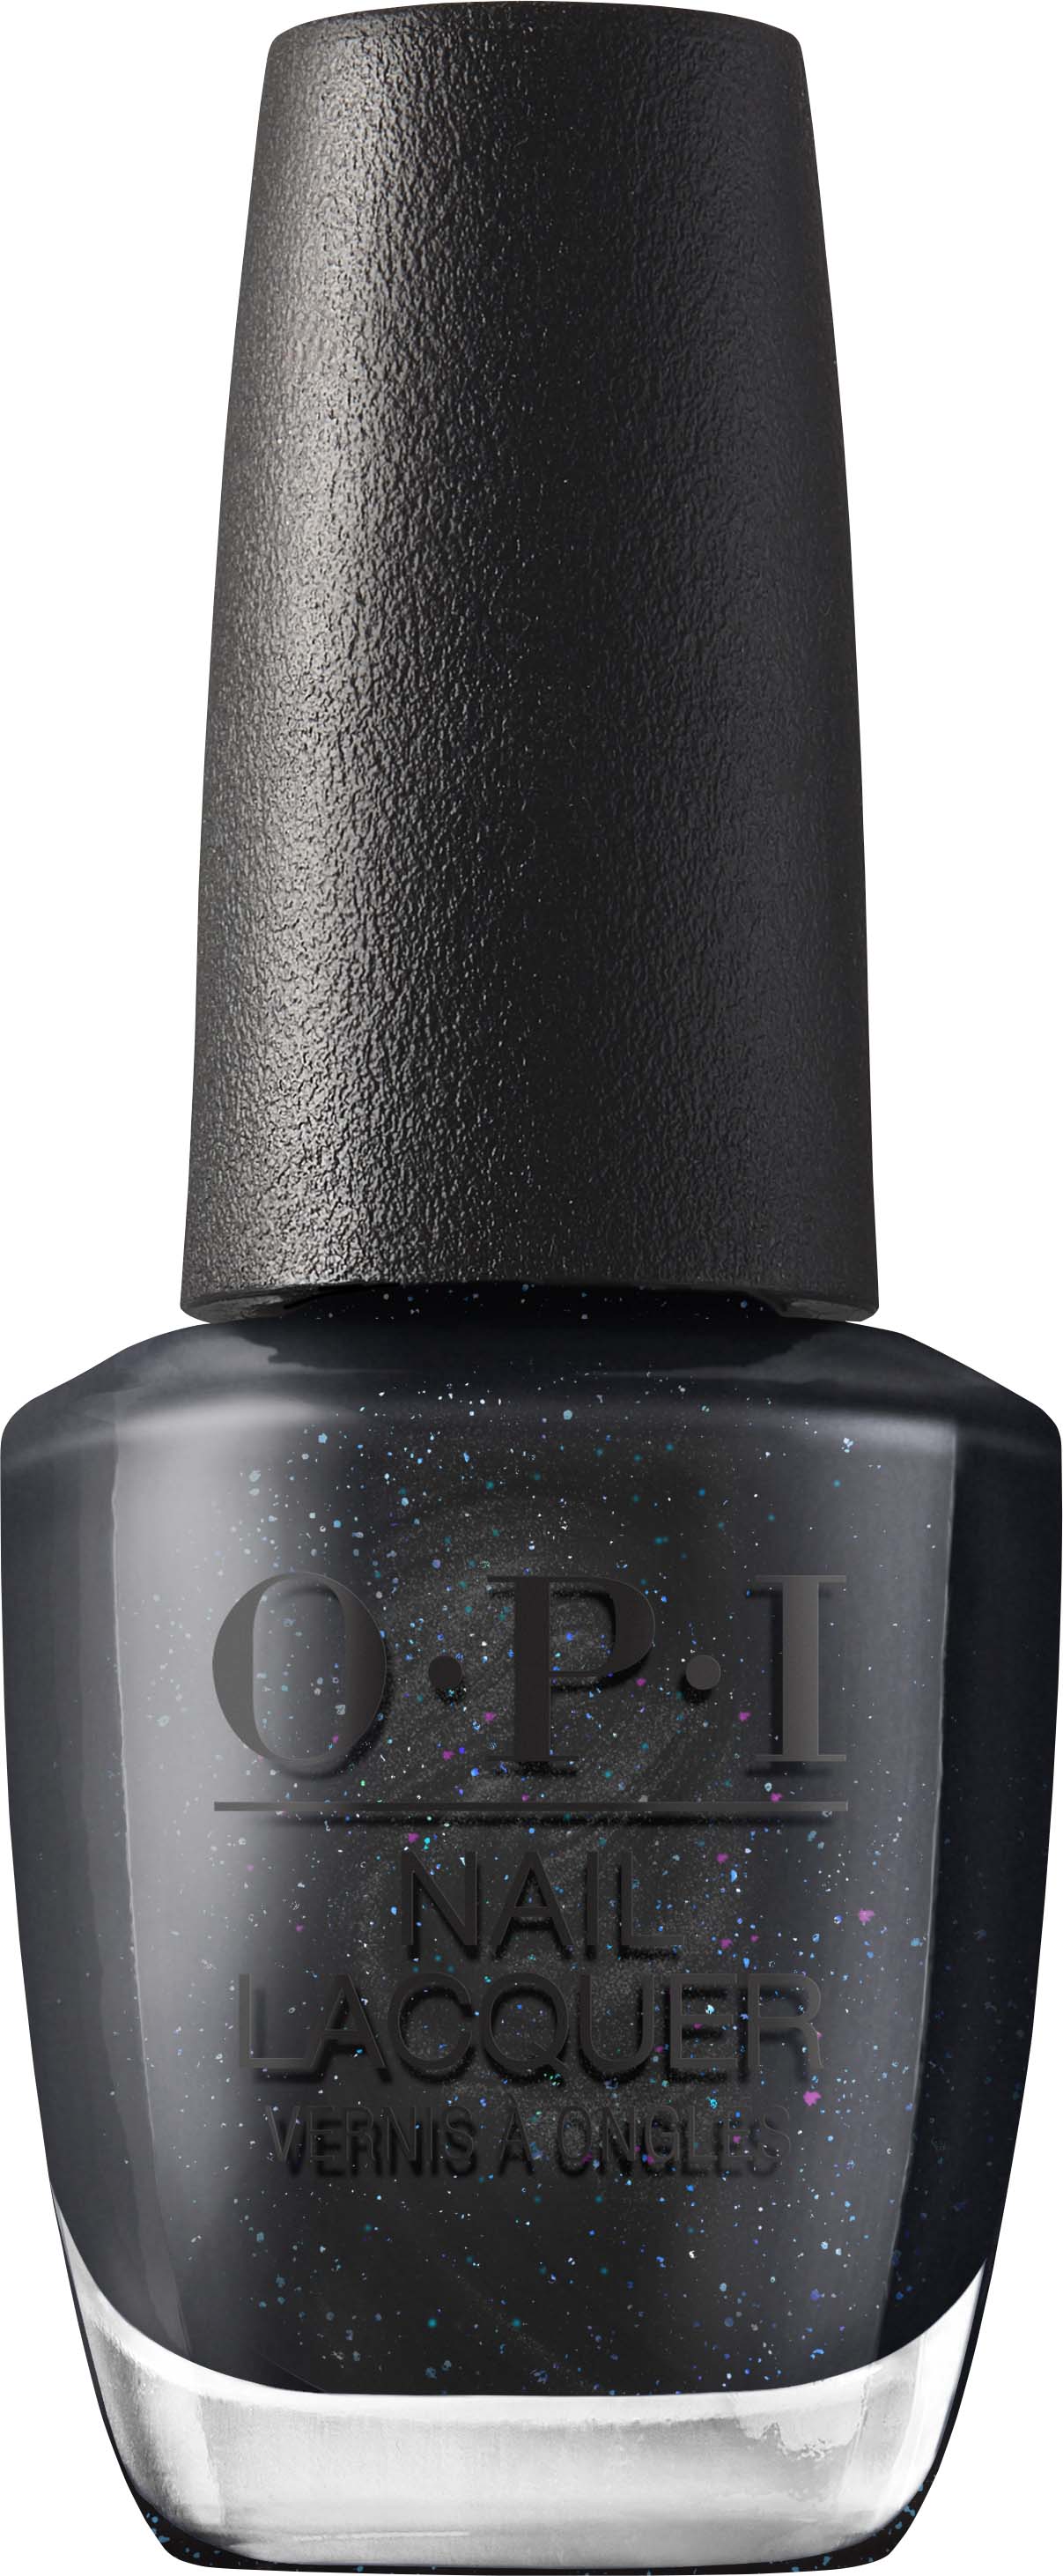 OPI Fall '22 Fall Wonders Nail Lacquer Cave the Way | lyko.com